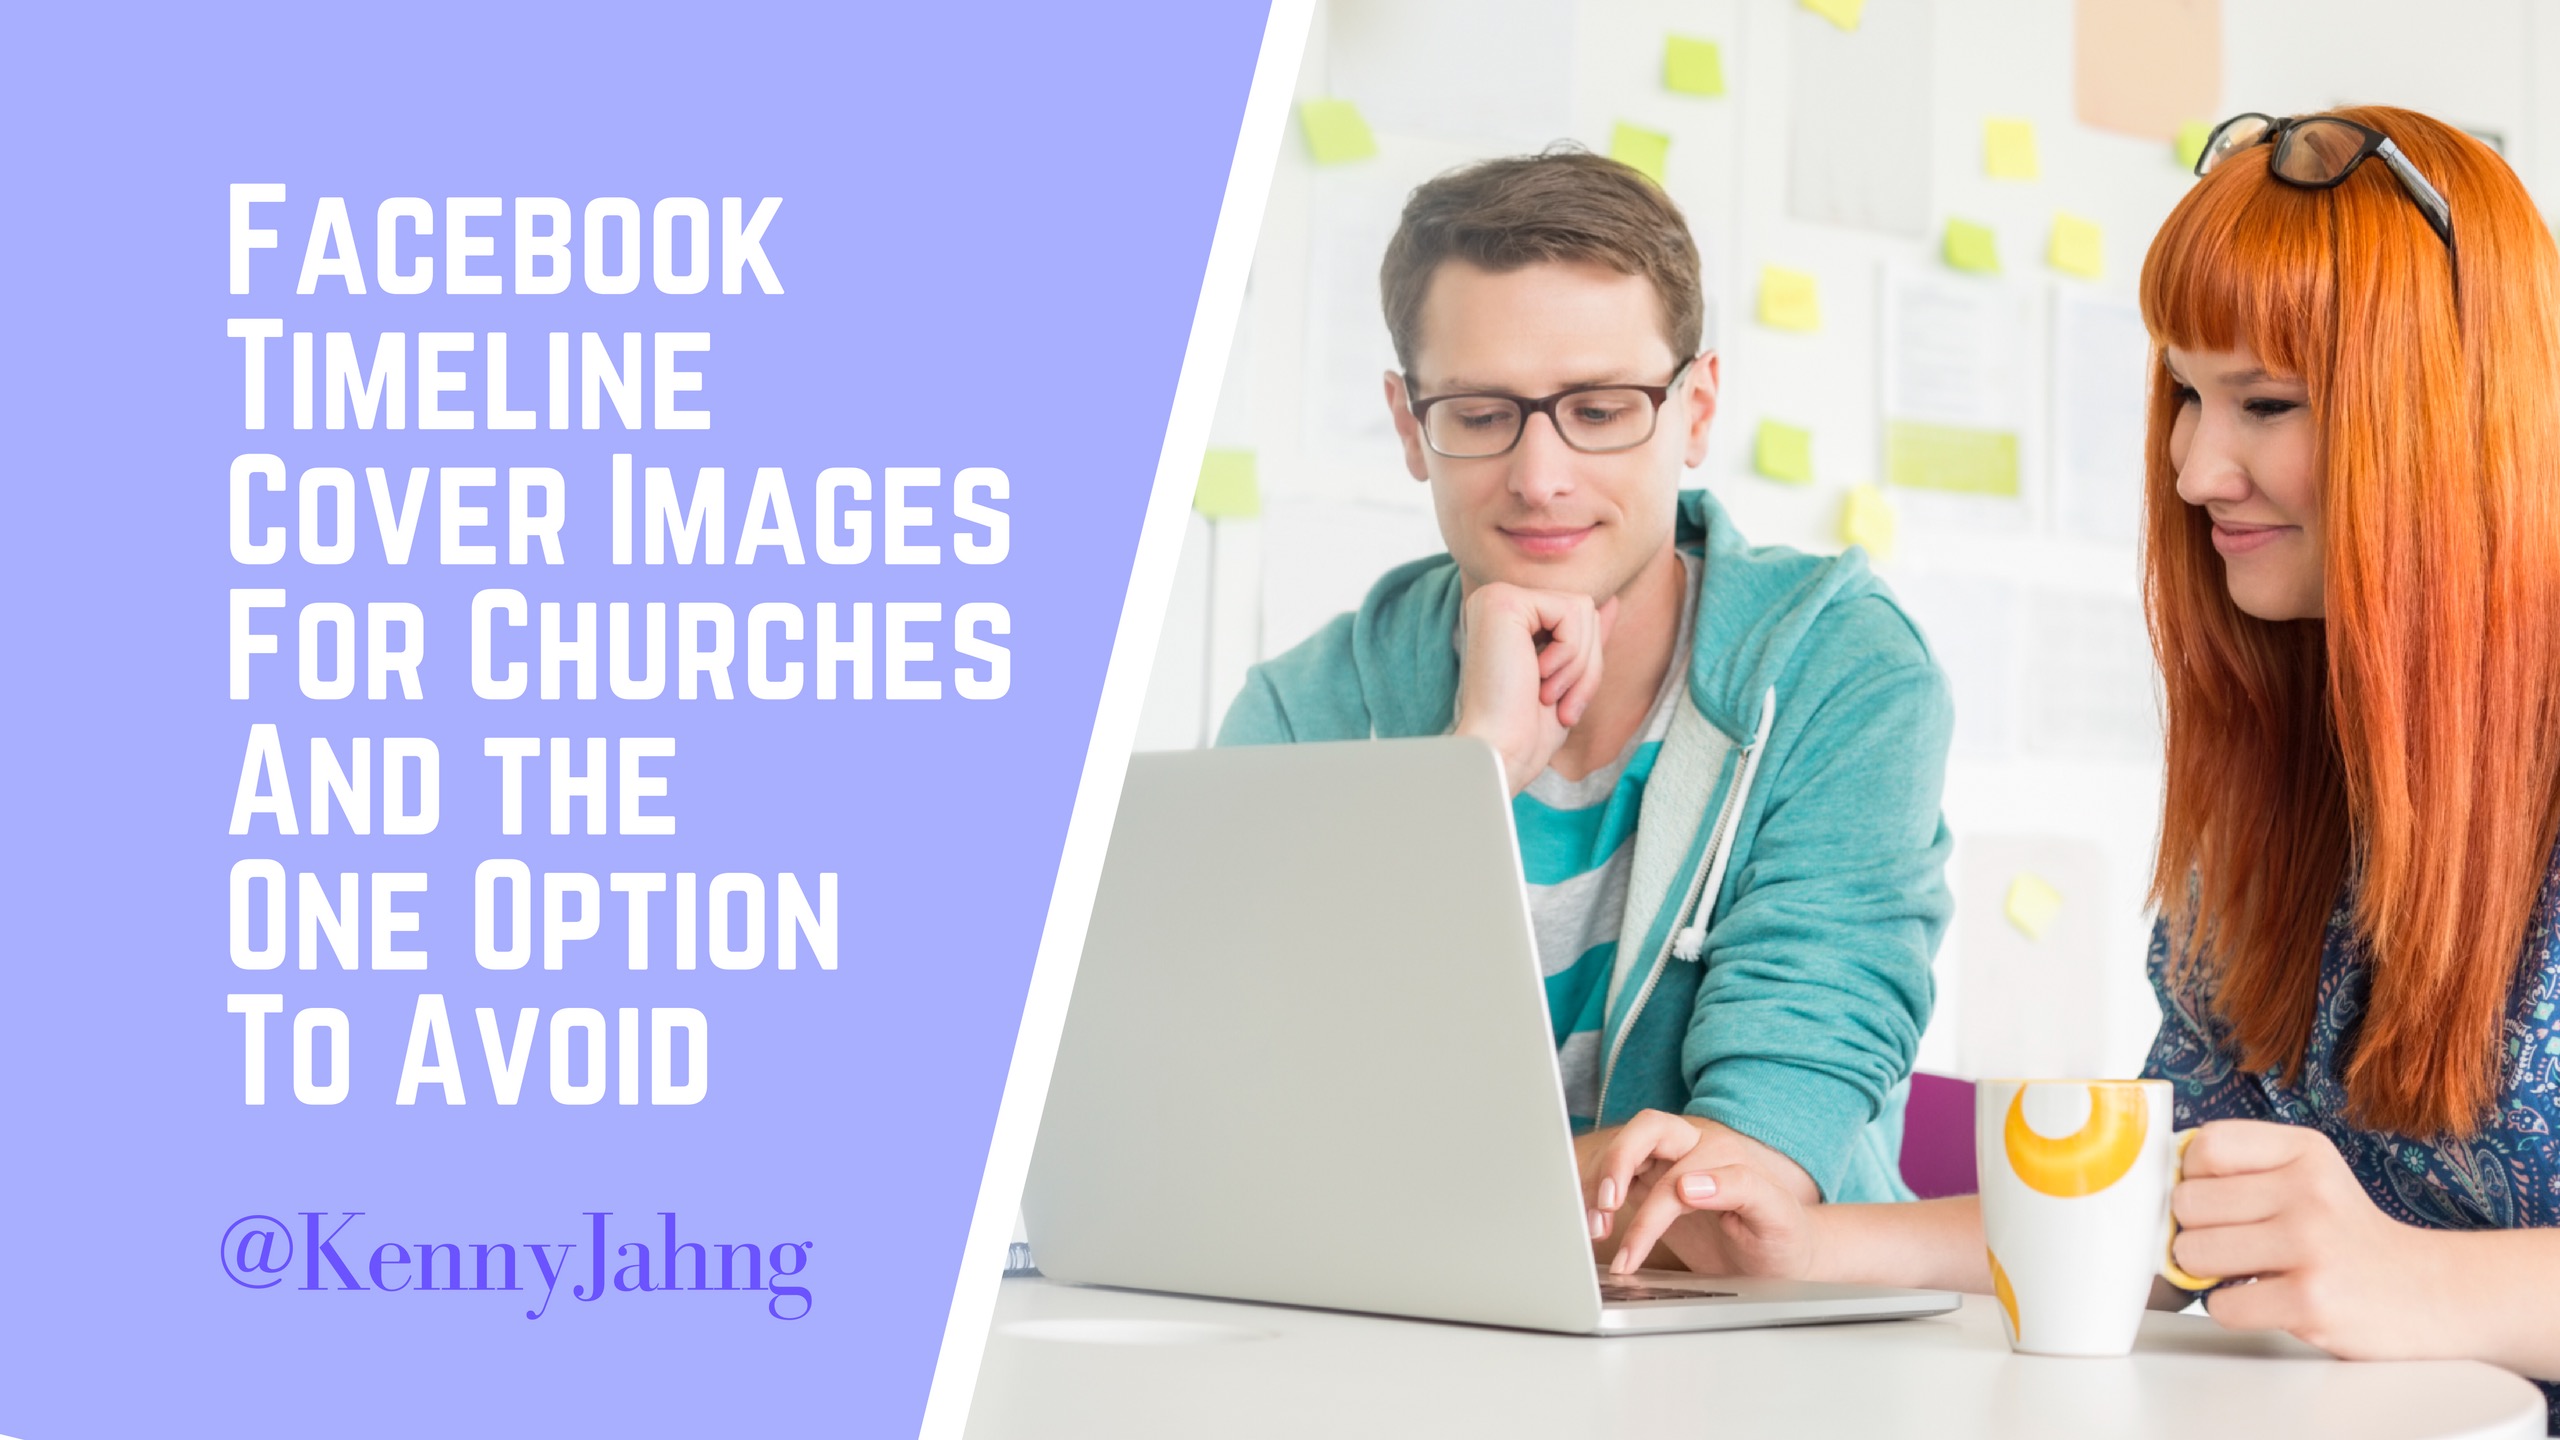 Facebook Timeline Cover Images For Churches And the One Option To Avoid